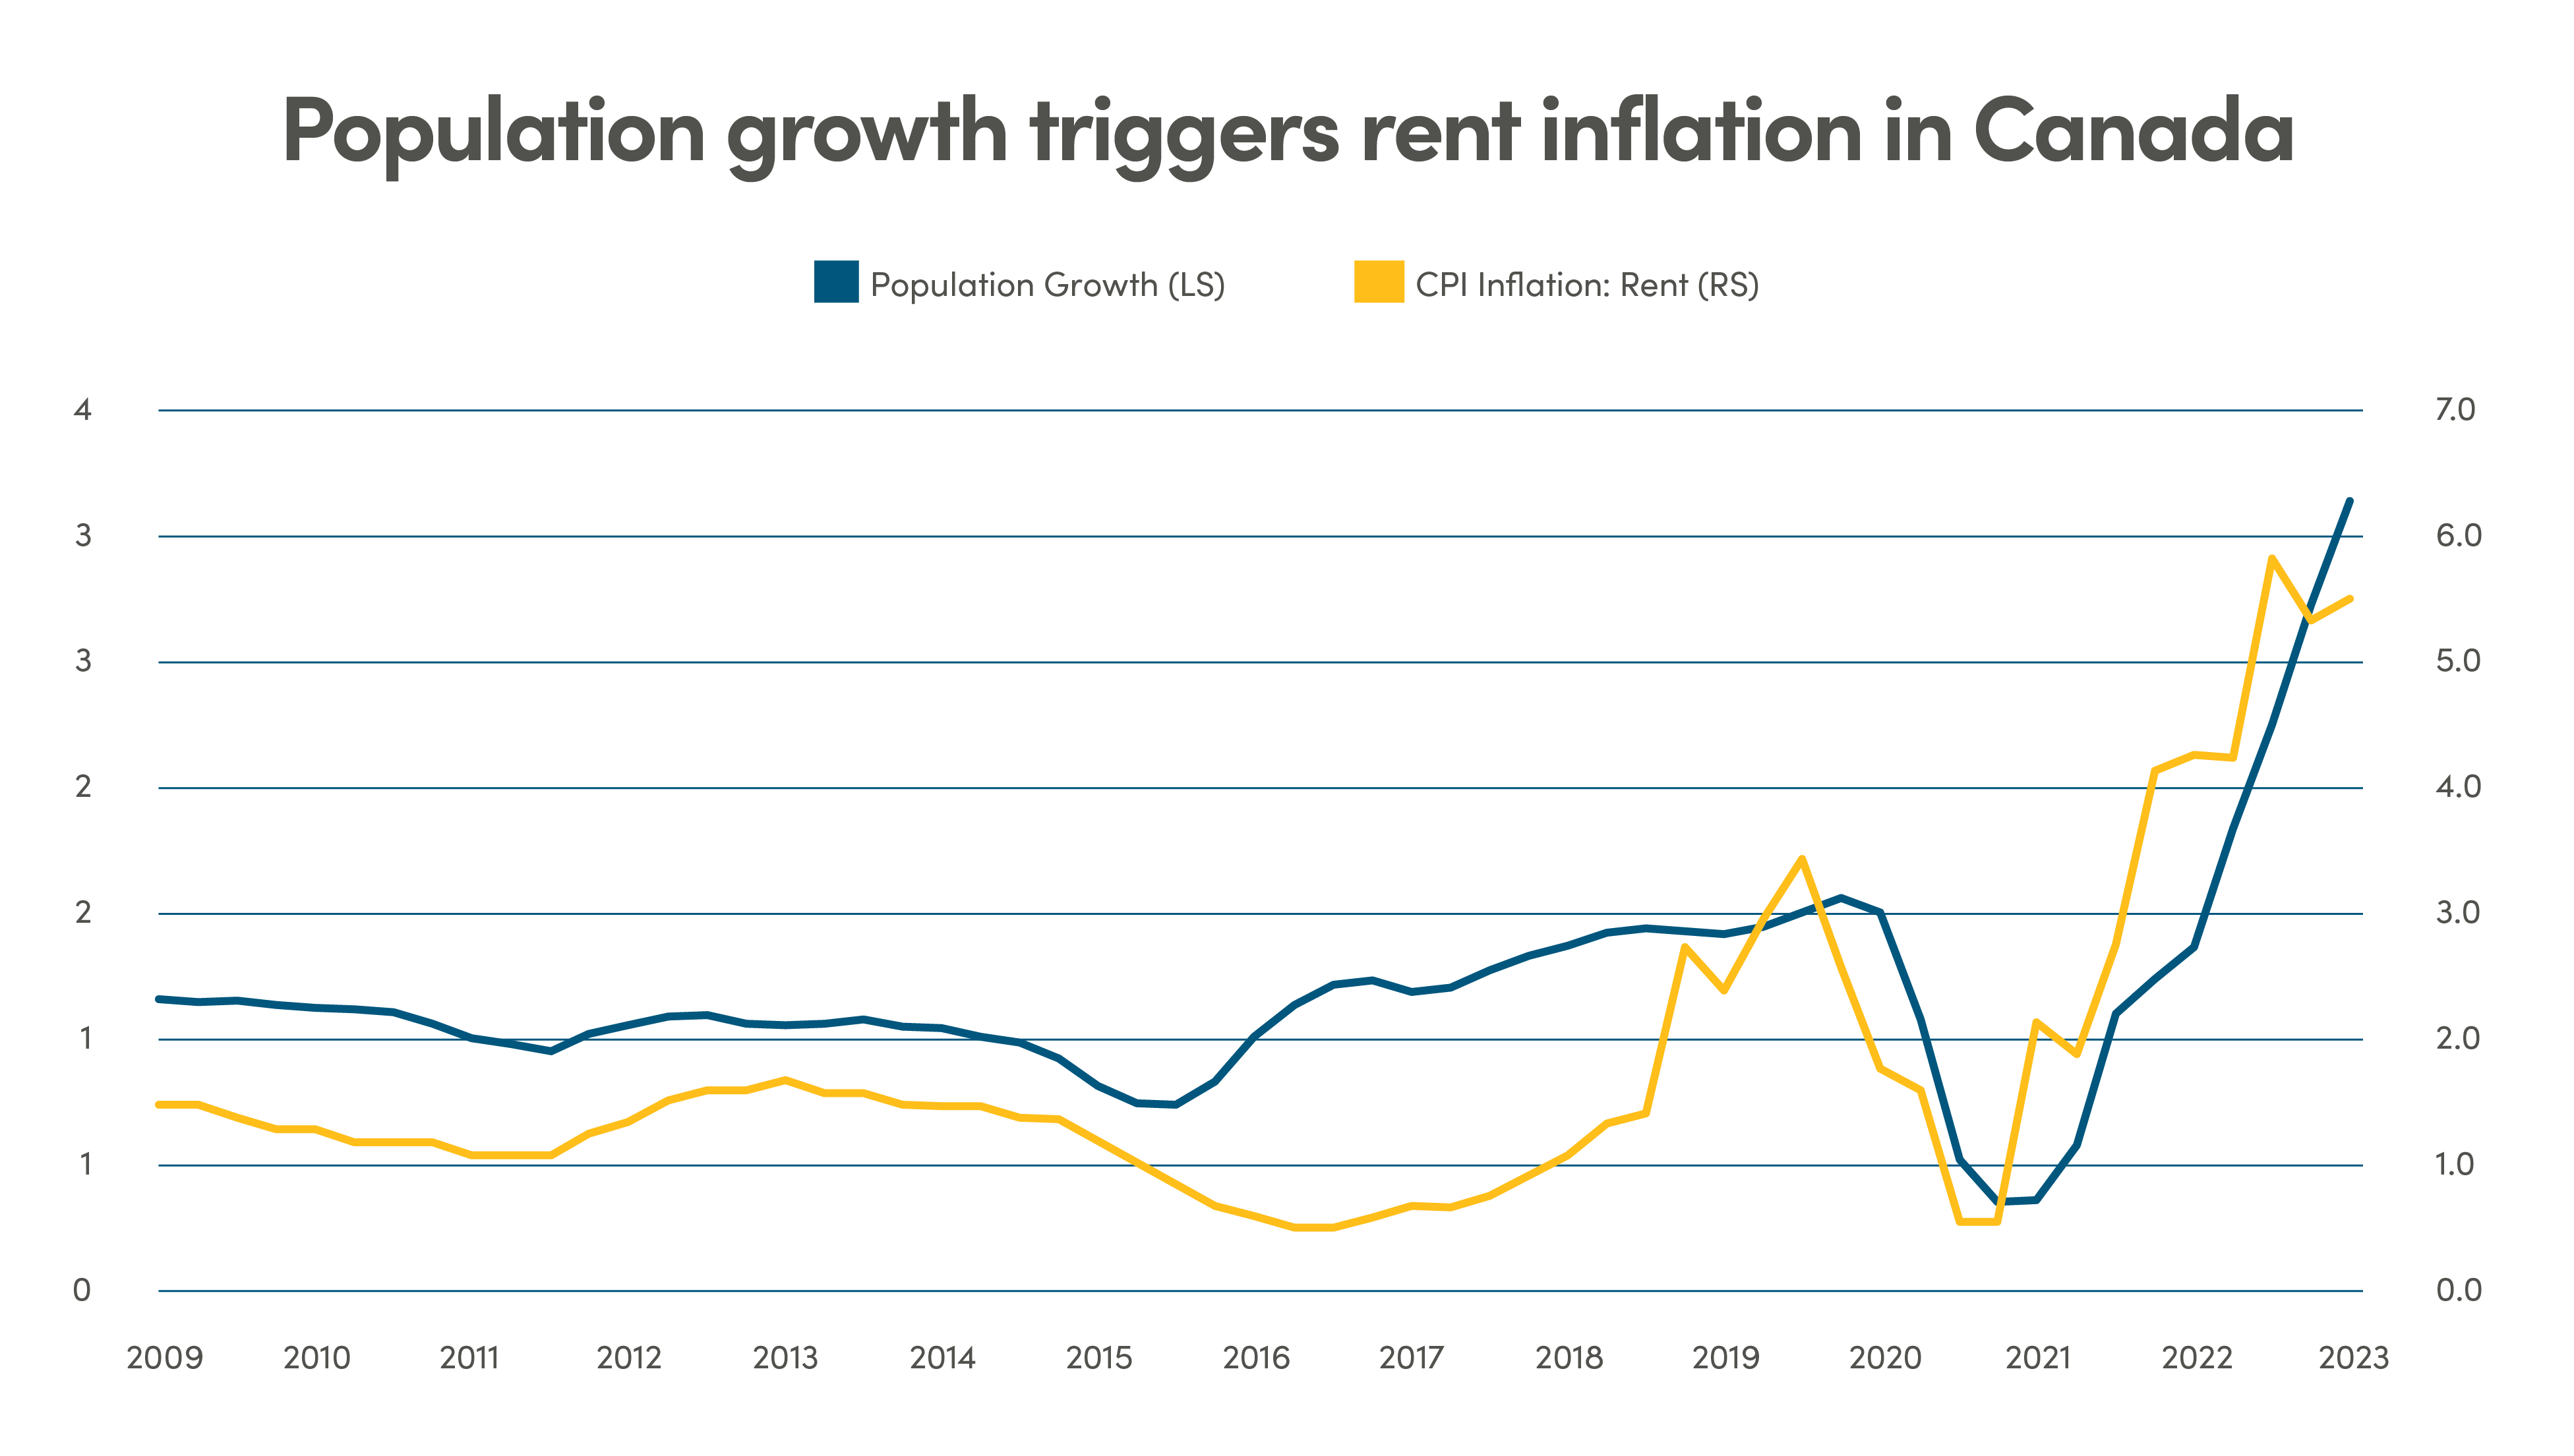 Line graph comparing population growth and CPI inflation: rent in Canada from 2009 to 2023